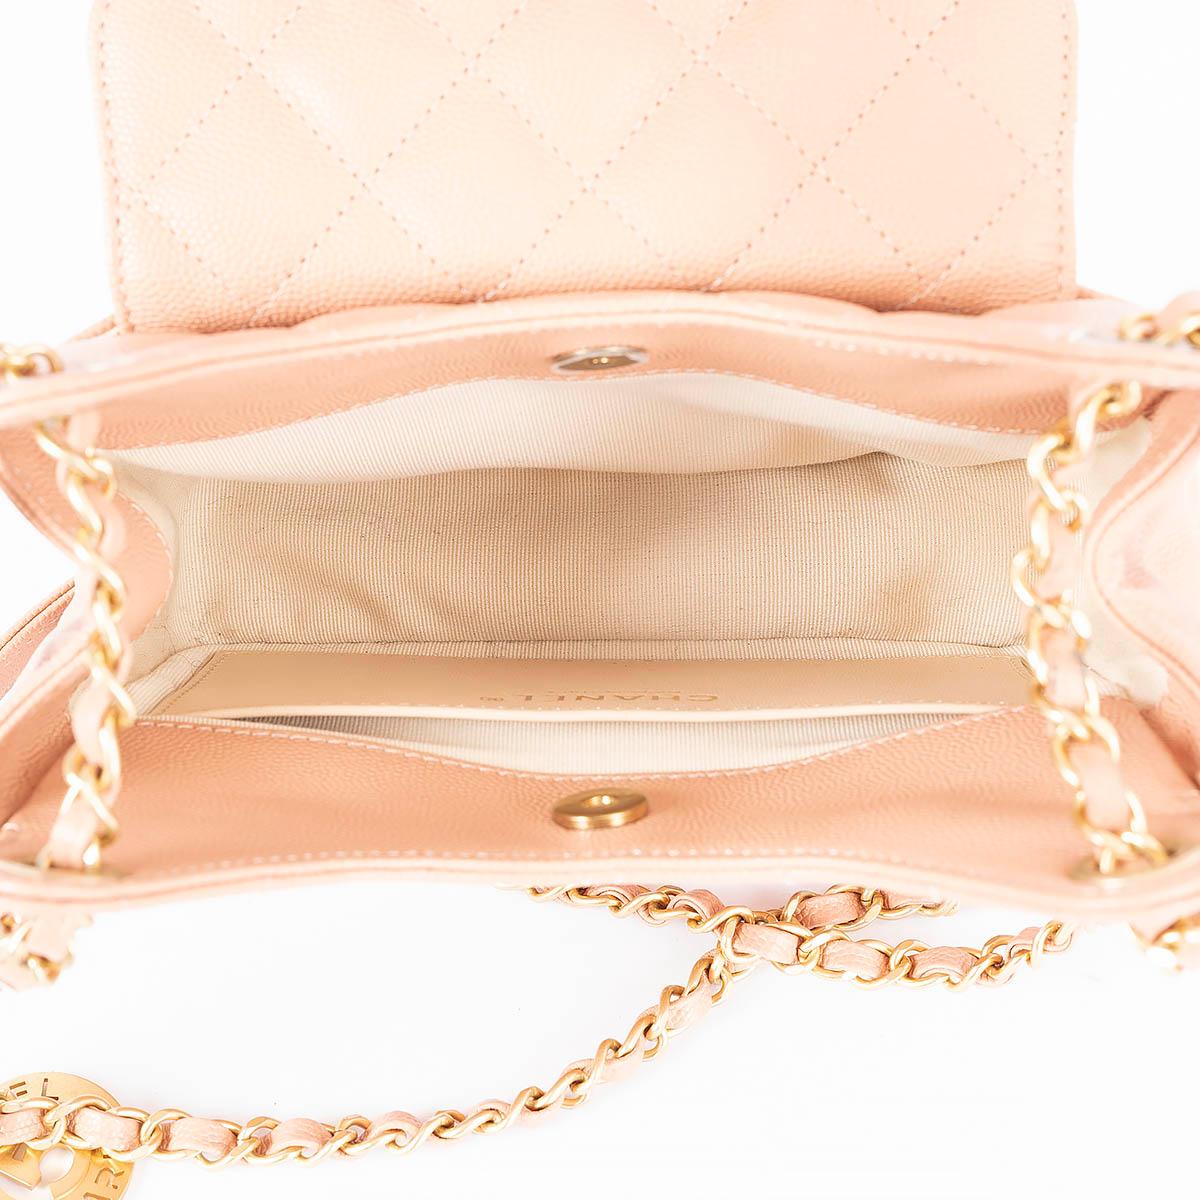 CHANEL beige peach Caviar leather SMALL WAVY HOBO Shoulder Bag NM375 For Sale 1